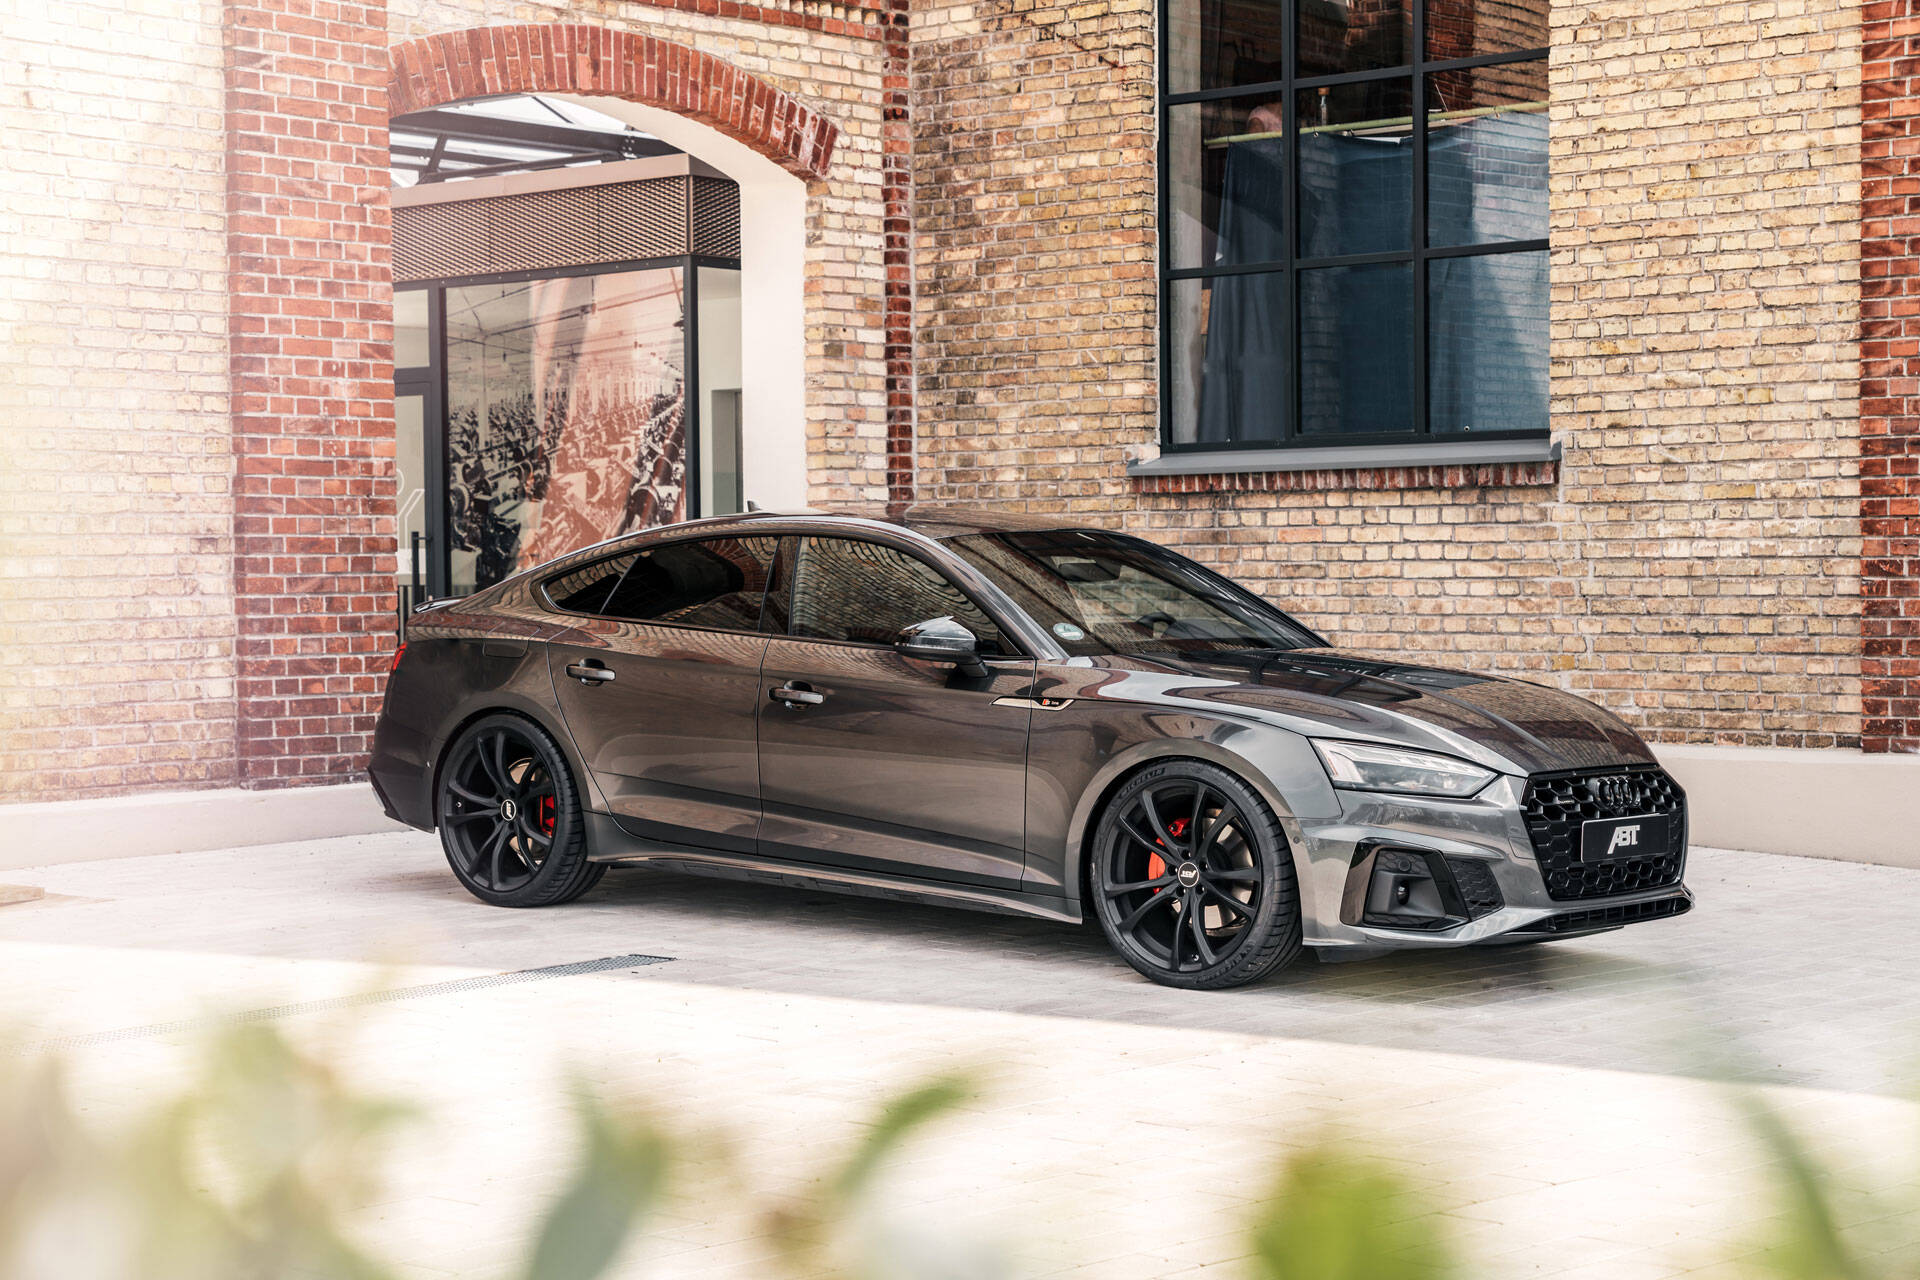 2020 Audi A5 and S5 upgraded by ABT Sportsline - Audi Tuning, VW Tuning,  Chiptuning von ABT Sportsline.